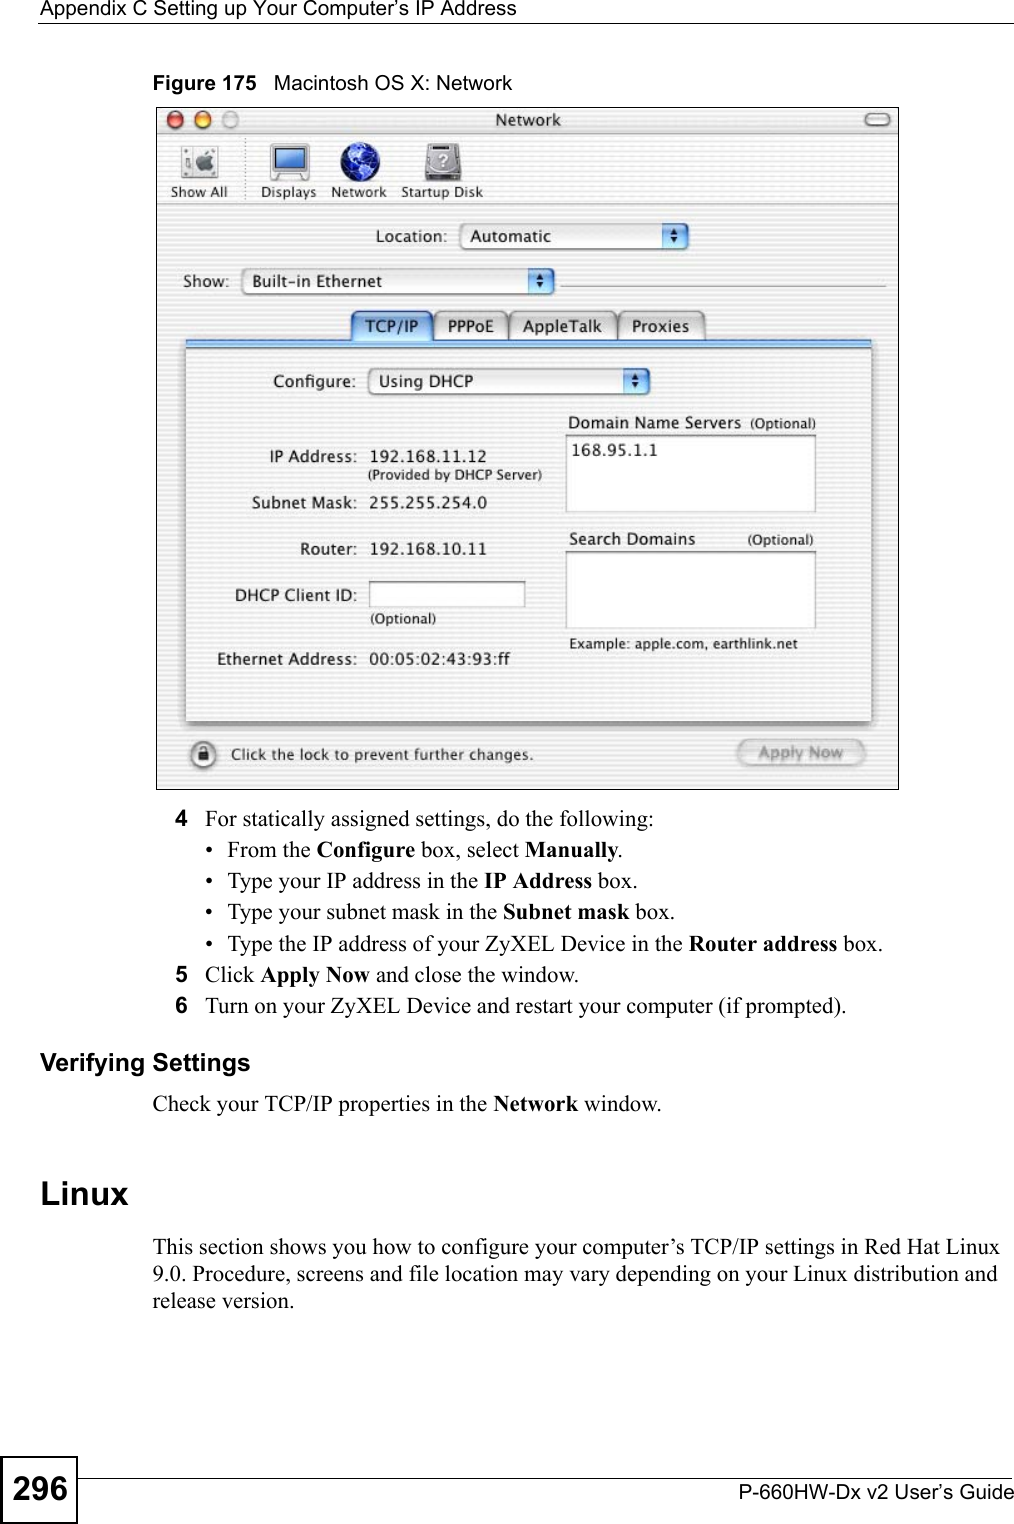 Appendix C Setting up Your Computer’s IP AddressP-660HW-Dx v2 User’s Guide296Figure 175   Macintosh OS X: Network4For statically assigned settings, do the following:•From the Configure box, select Manually.• Type your IP address in the IP Address box.• Type your subnet mask in the Subnet mask box.• Type the IP address of your ZyXEL Device in the Router address box.5Click Apply Now and close the window.6Turn on your ZyXEL Device and restart your computer (if prompted).Verifying SettingsCheck your TCP/IP properties in the Network window.Linux This section shows you how to configure your computer’s TCP/IP settings in Red Hat Linux 9.0. Procedure, screens and file location may vary depending on your Linux distribution and release version. 